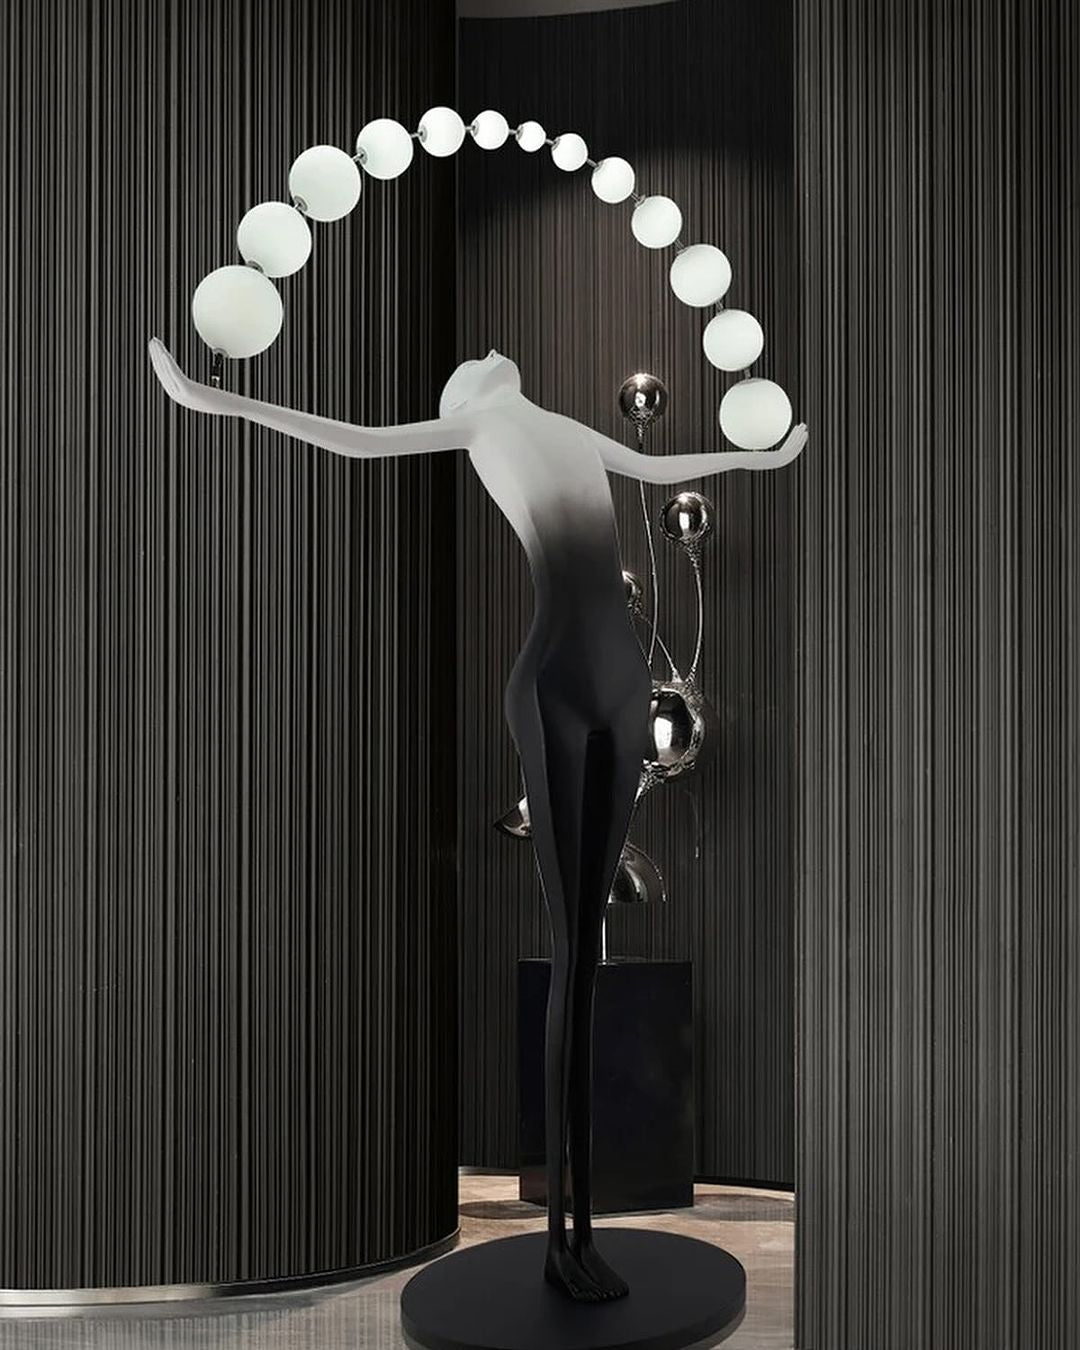 Hdc Black And White Lady Art Sculpture Living Room Creative Abstract Character Decorative Floor Lamp